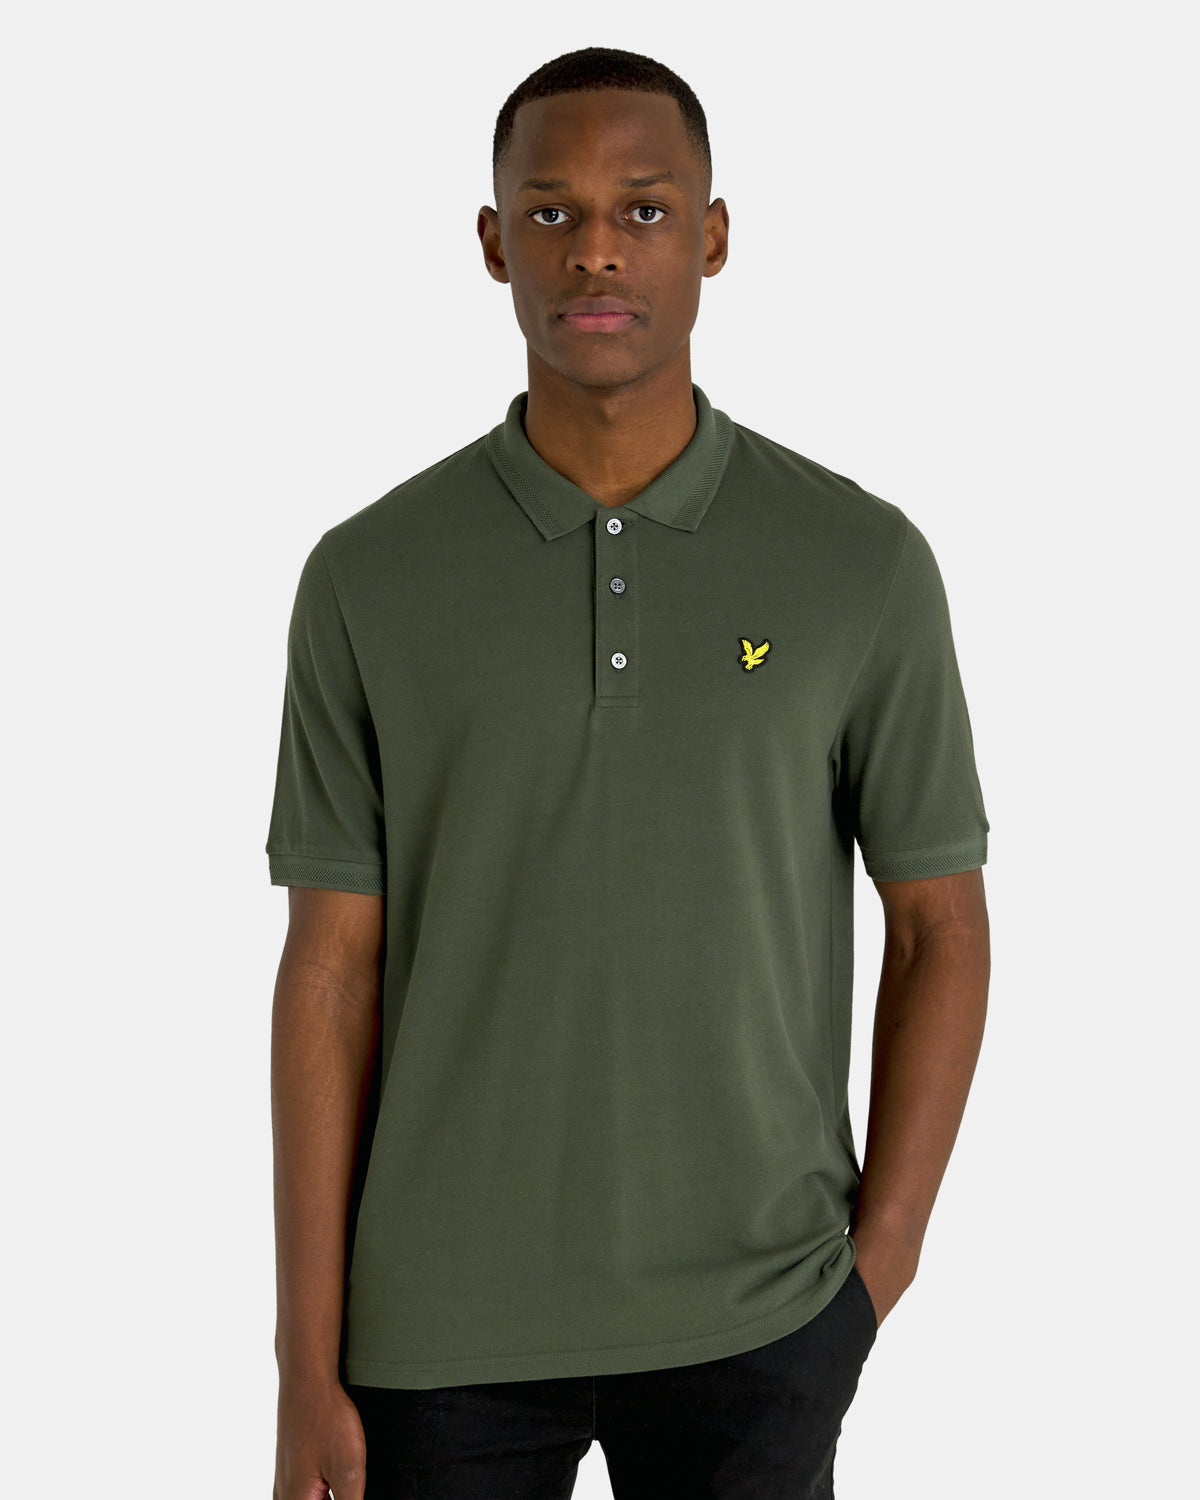 Lyle & Scott Mens Textured Tipped Polo Shirt Plus in Green - 5XL product